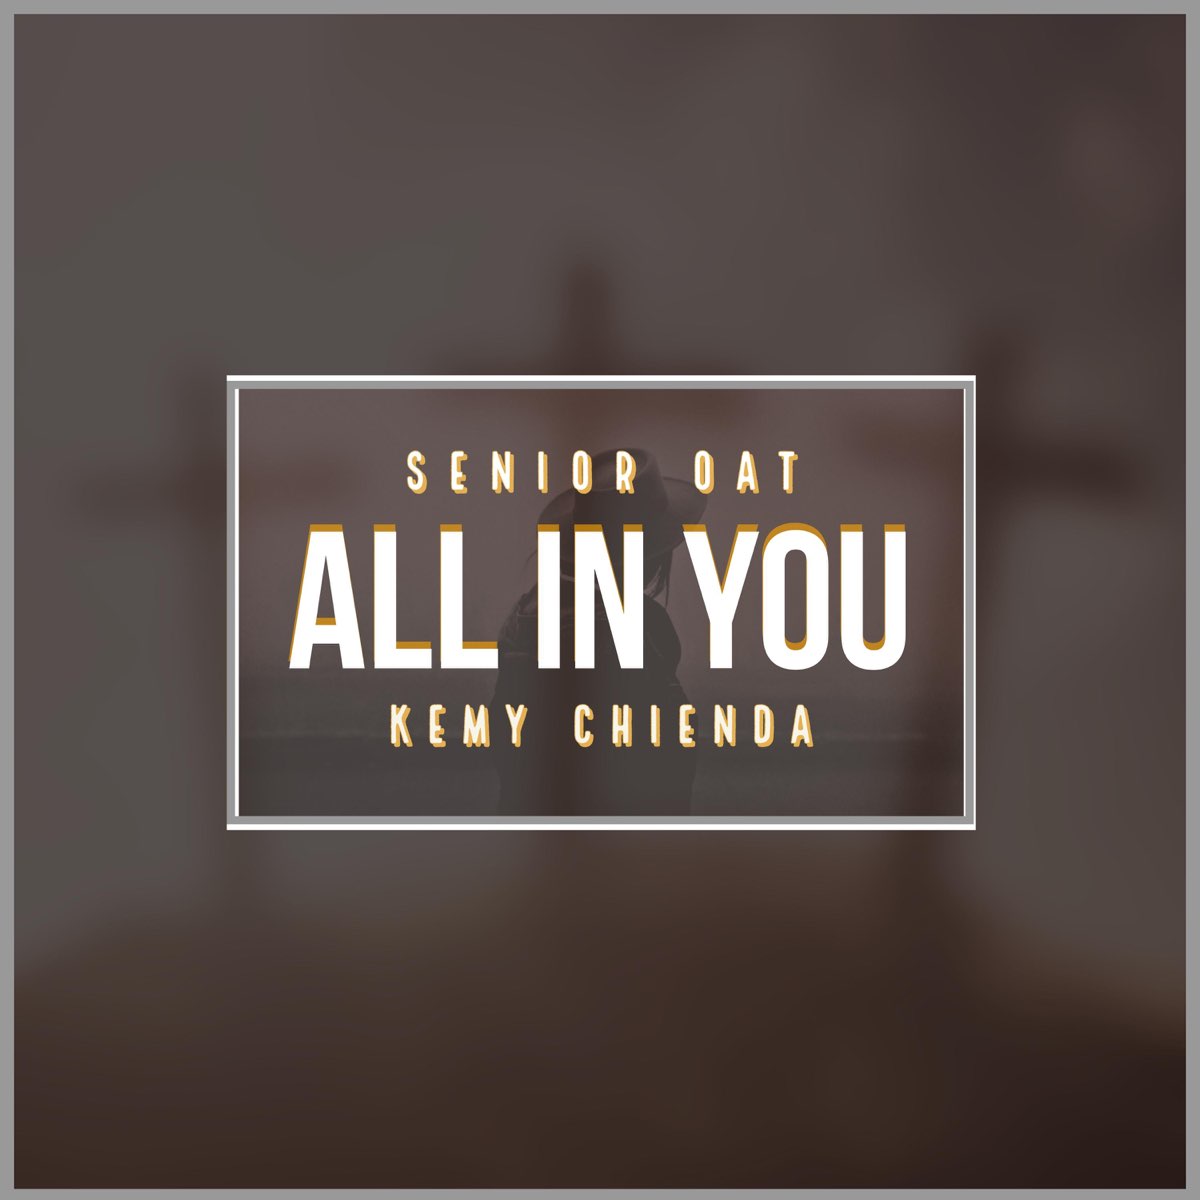 ‎All In You (feat. Kemy Chienda) - Single by Senior Oat on Apple Music